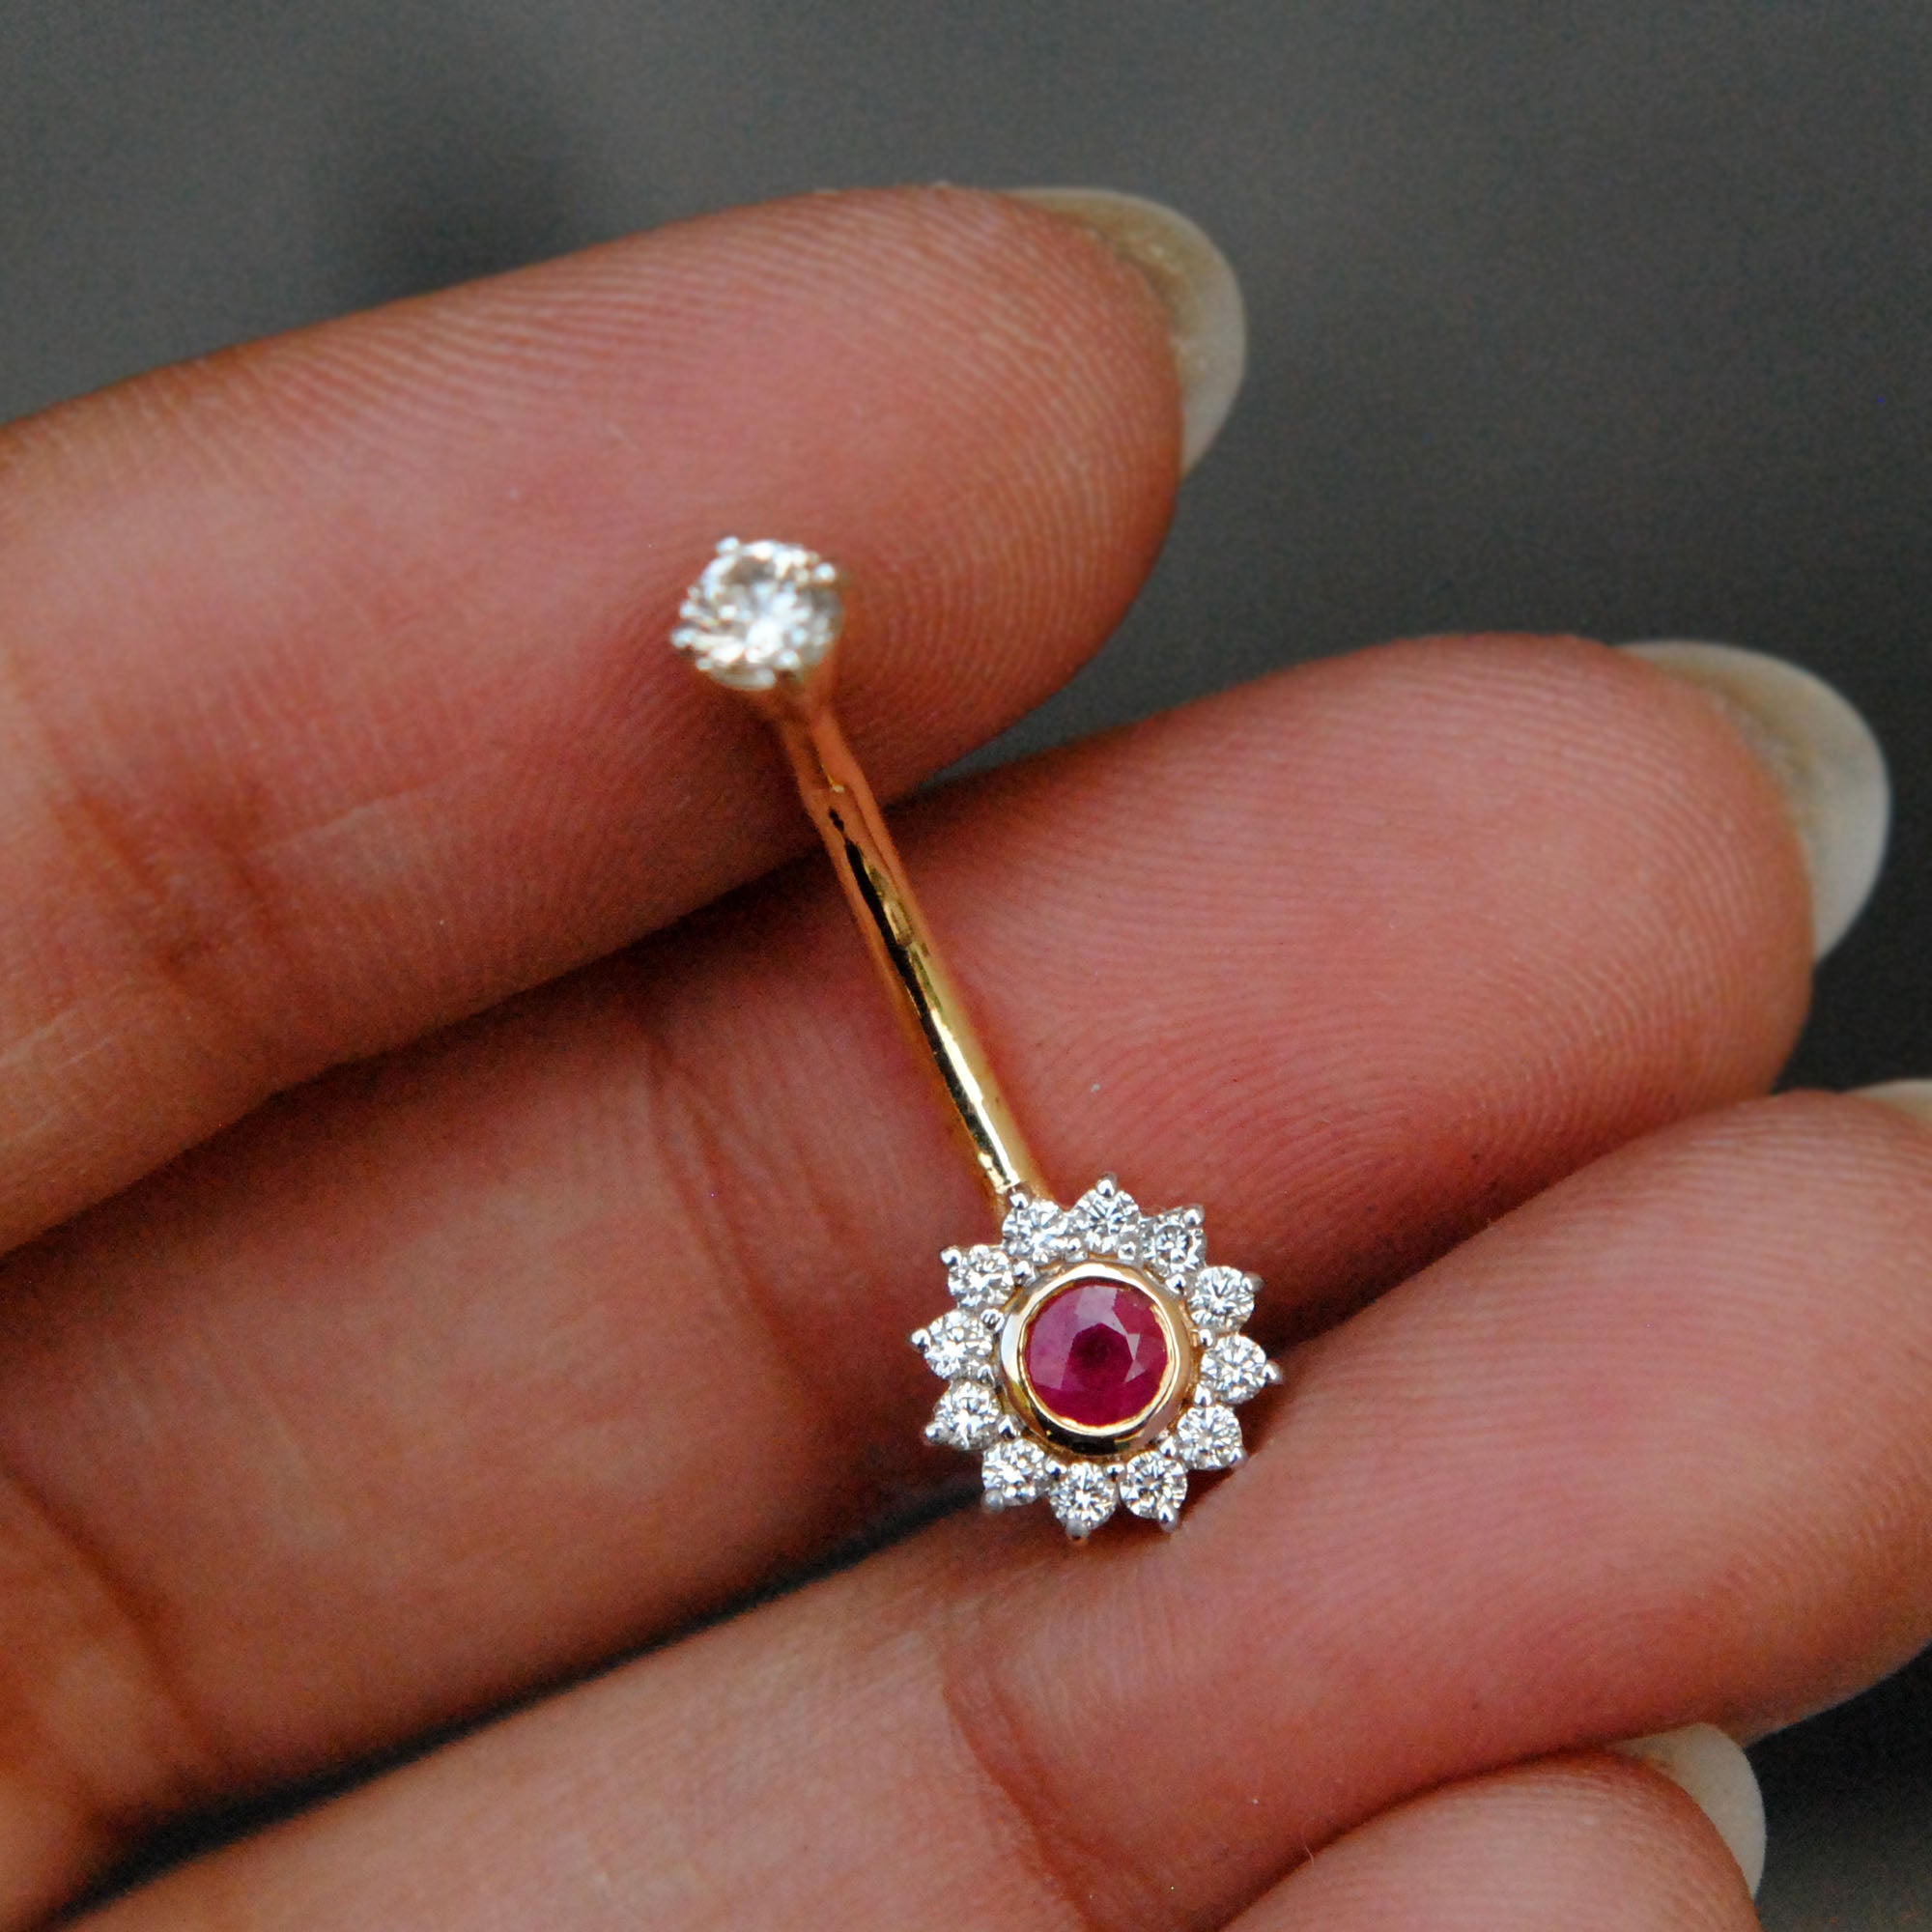 14g Floral Diamond & Ruby Floating Belly Bar